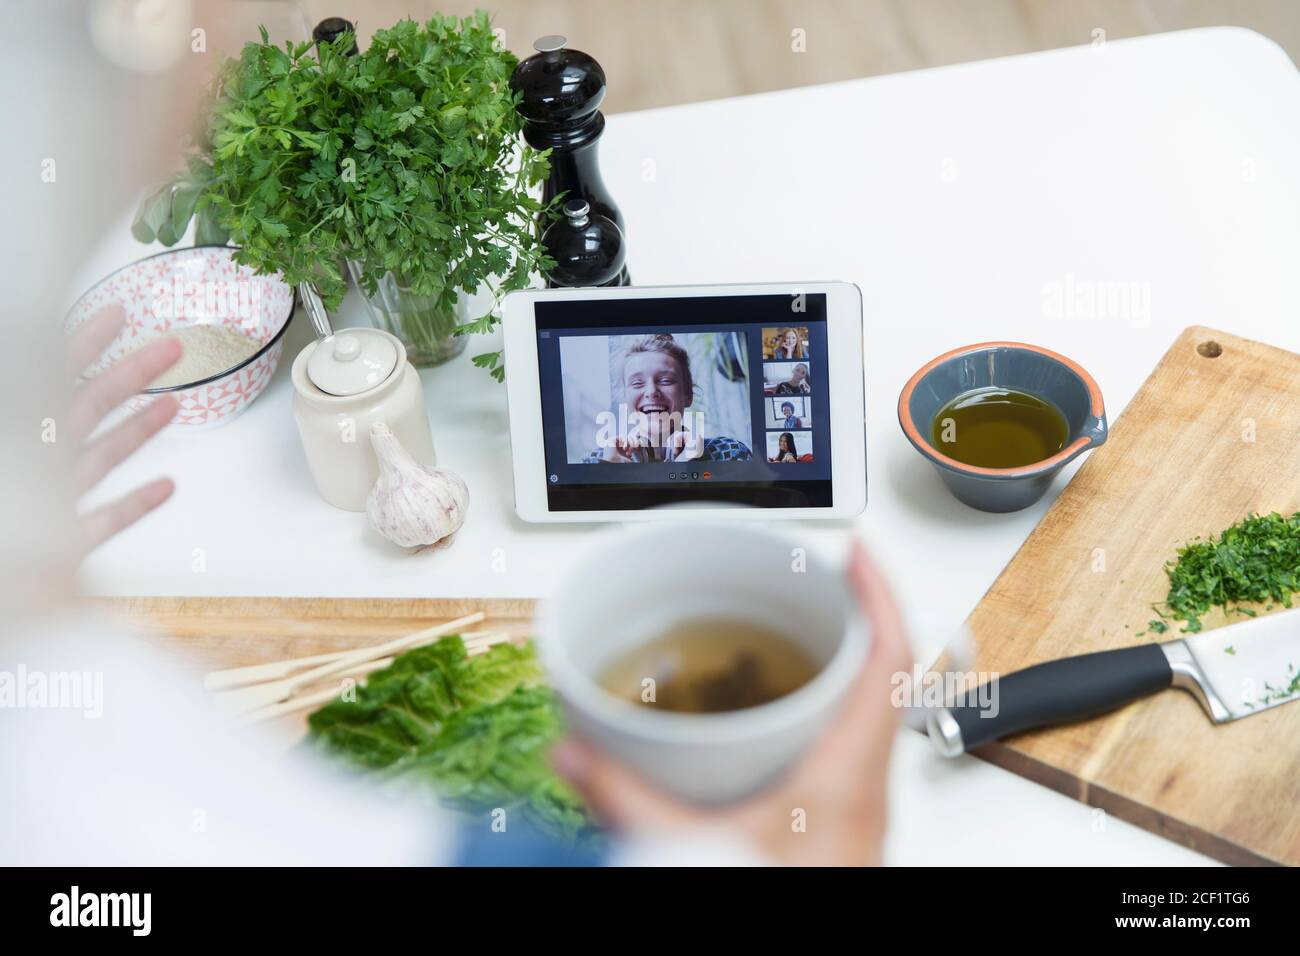 Woman drinking tea and cooking while video chatting with friends Stock Photo